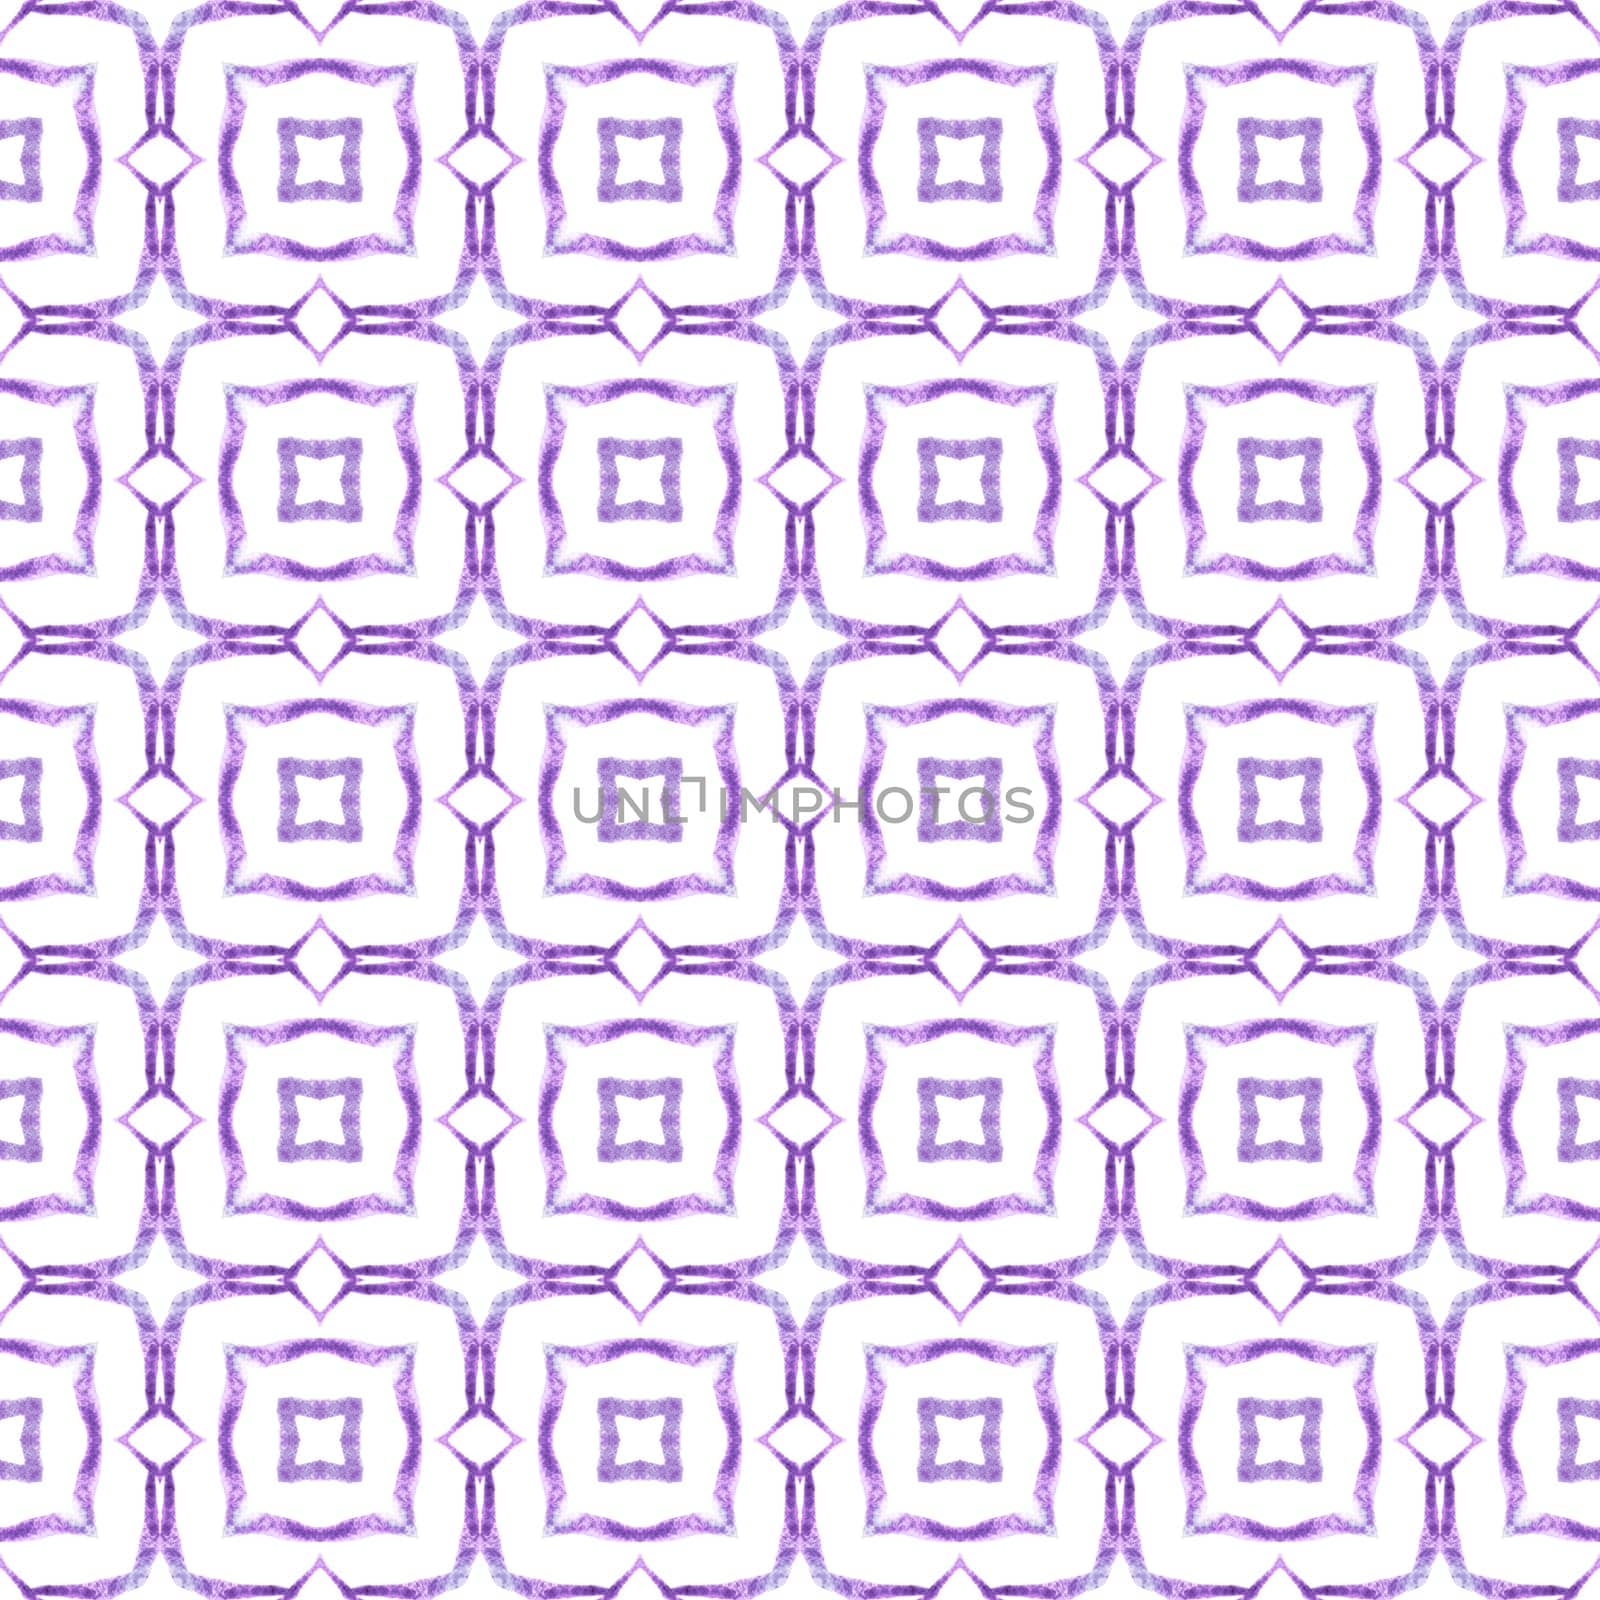 Textile ready stylish print, swimwear fabric, wallpaper, wrapping. Purple exotic boho chic summer design. Hand painted tiled watercolor border. Tiled watercolor background.